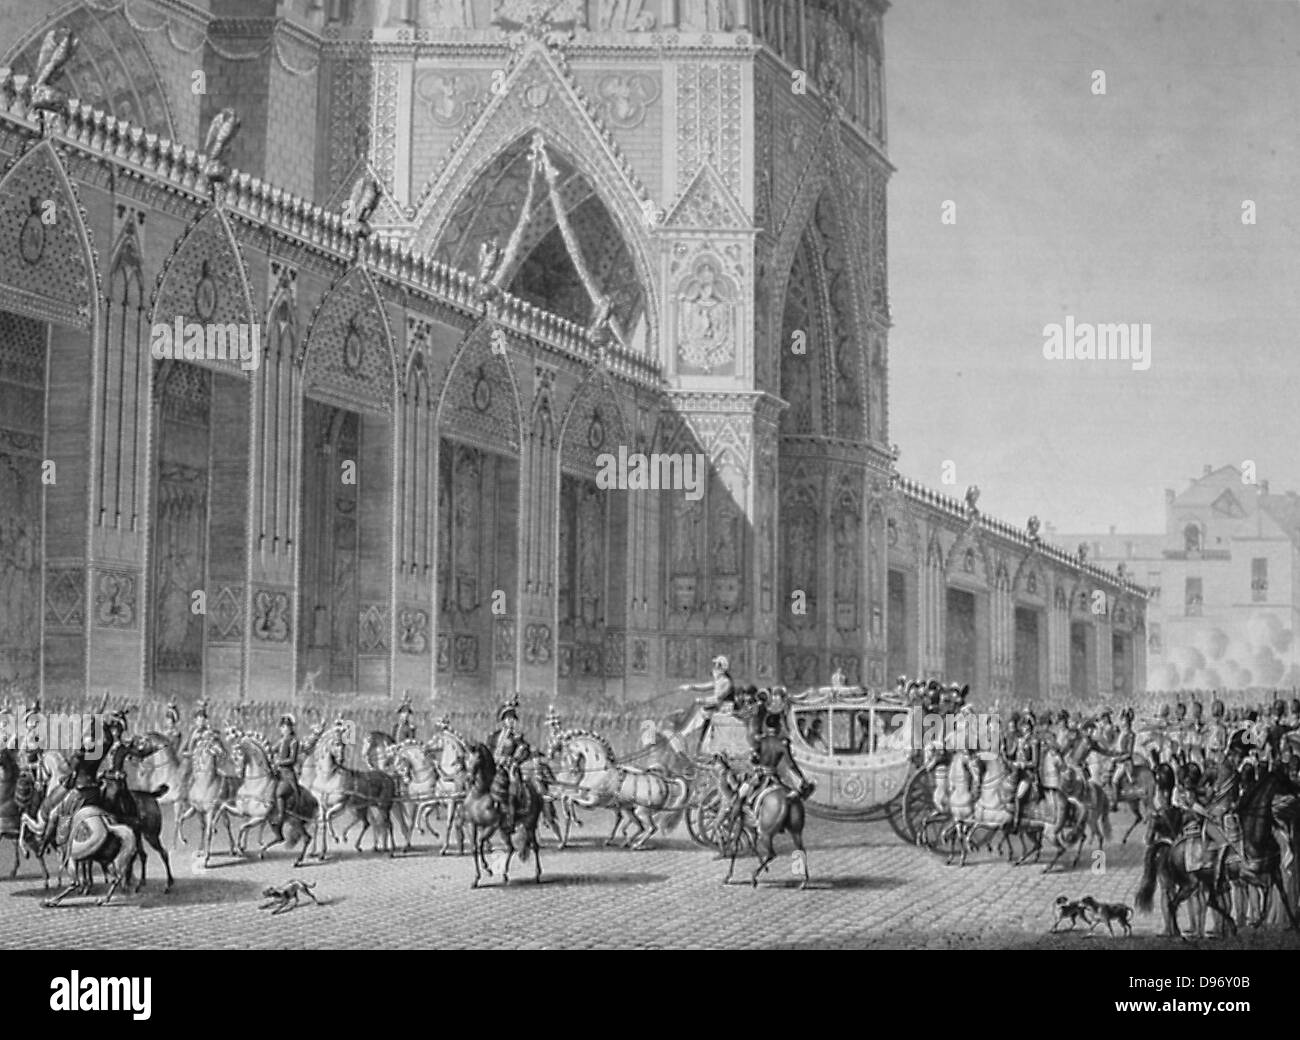 Coronation of Napoleon I, 2 December 1804. Arrival of the Emperor's coach at Notre Dame, Paris. Engraving. Stock Photo